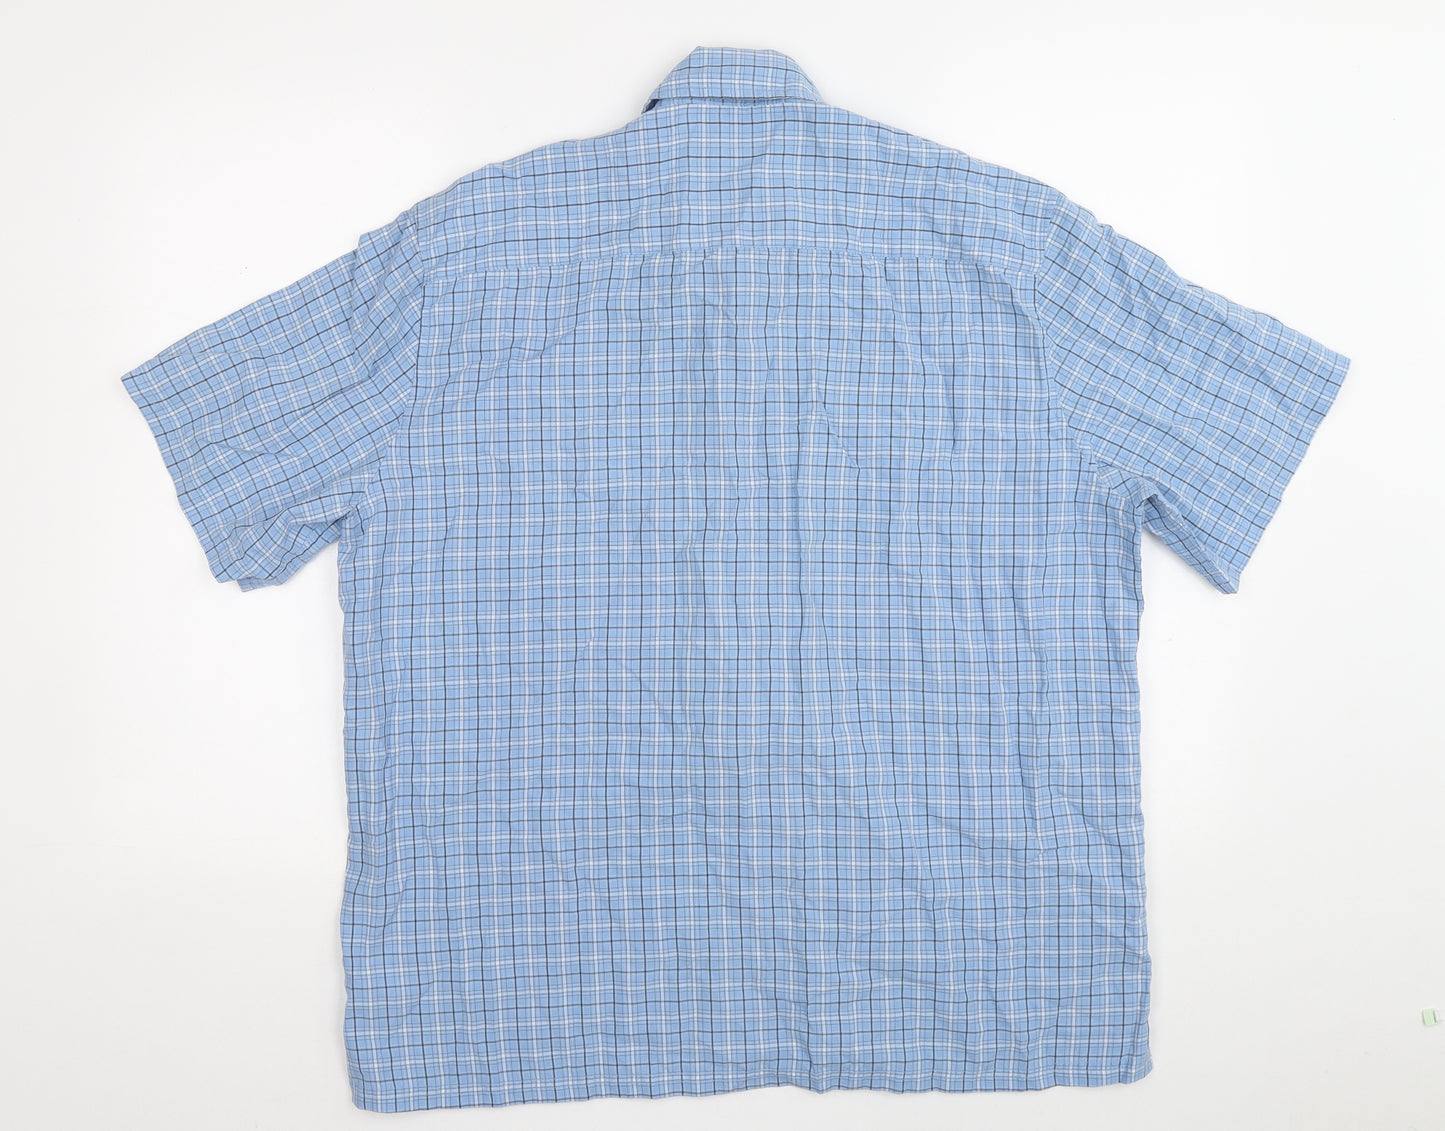 F&F Mens Blue Plaid Modal Button-Up Size L Collared Button